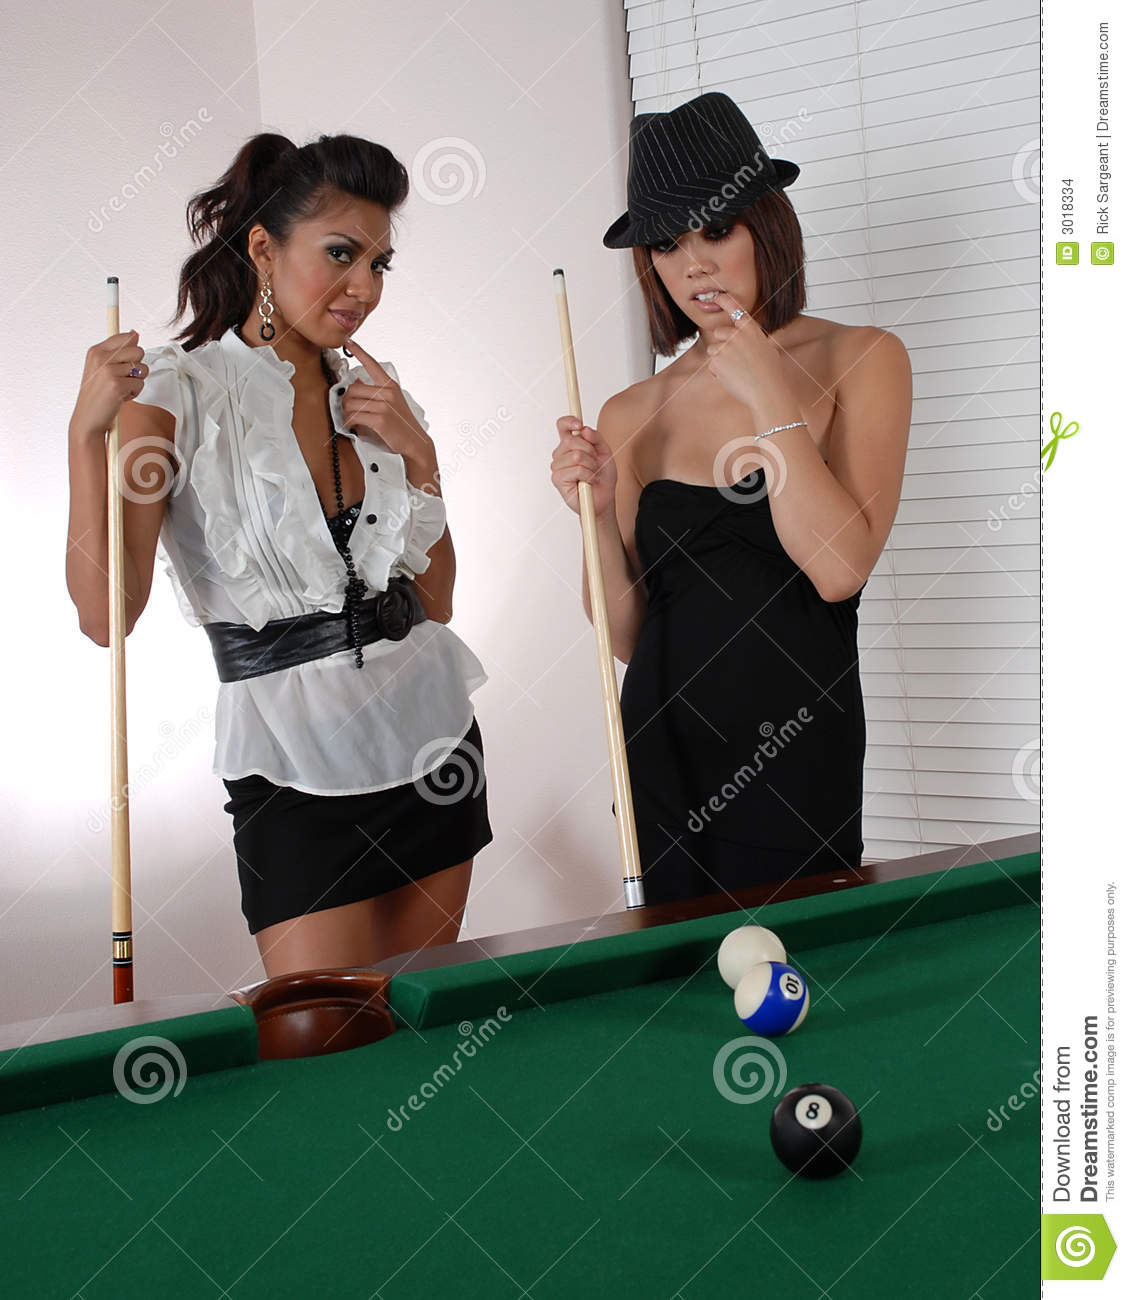 Two Women Holding Pool Sticks Or Cues Next To A Pool Table 